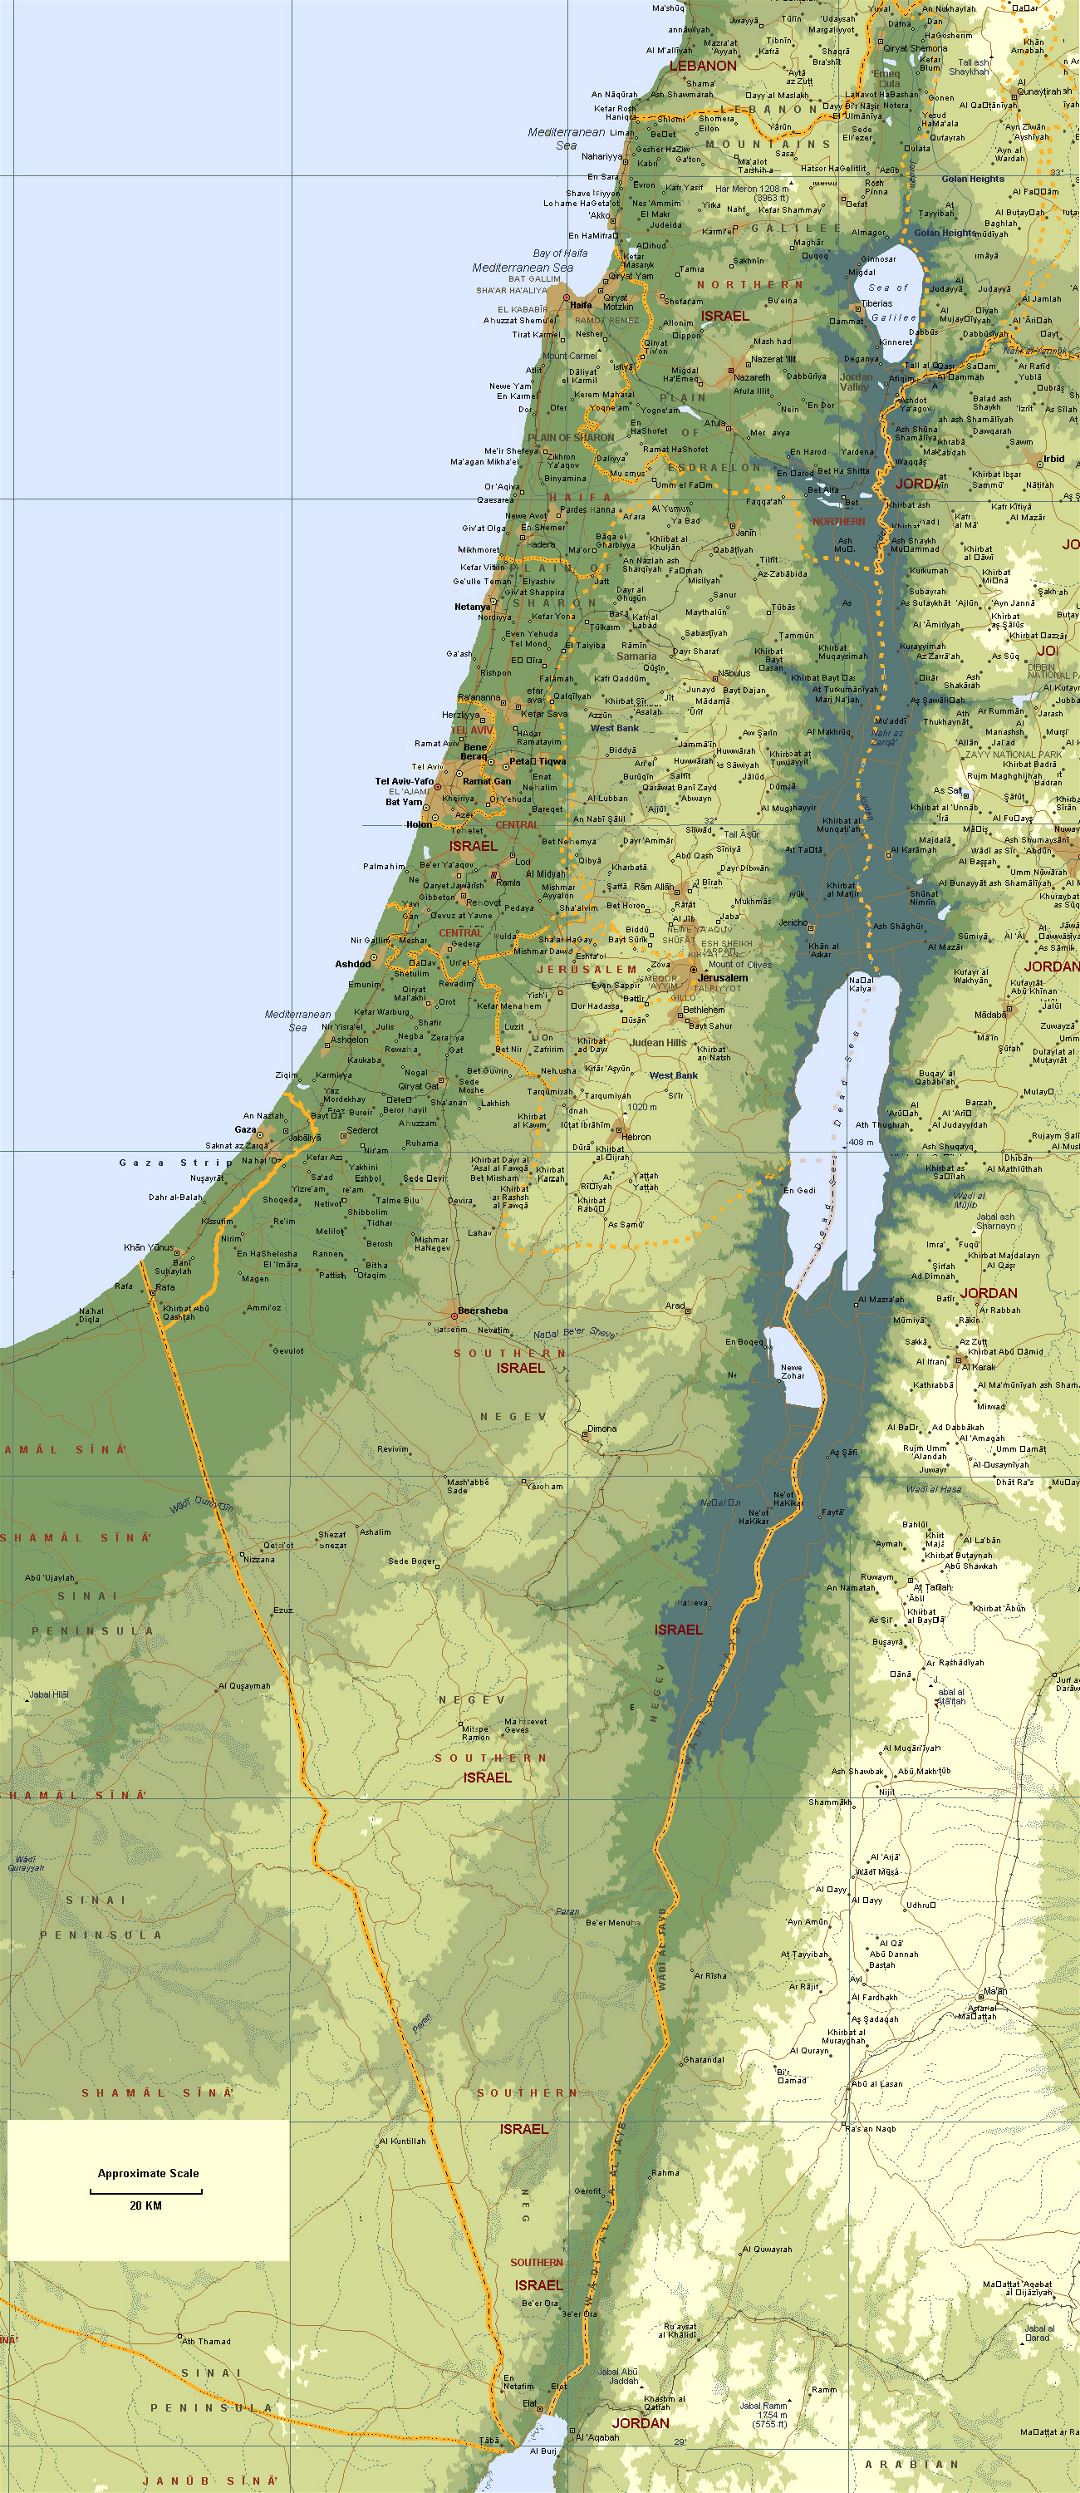 Large elevation map of Israel with roads and cities